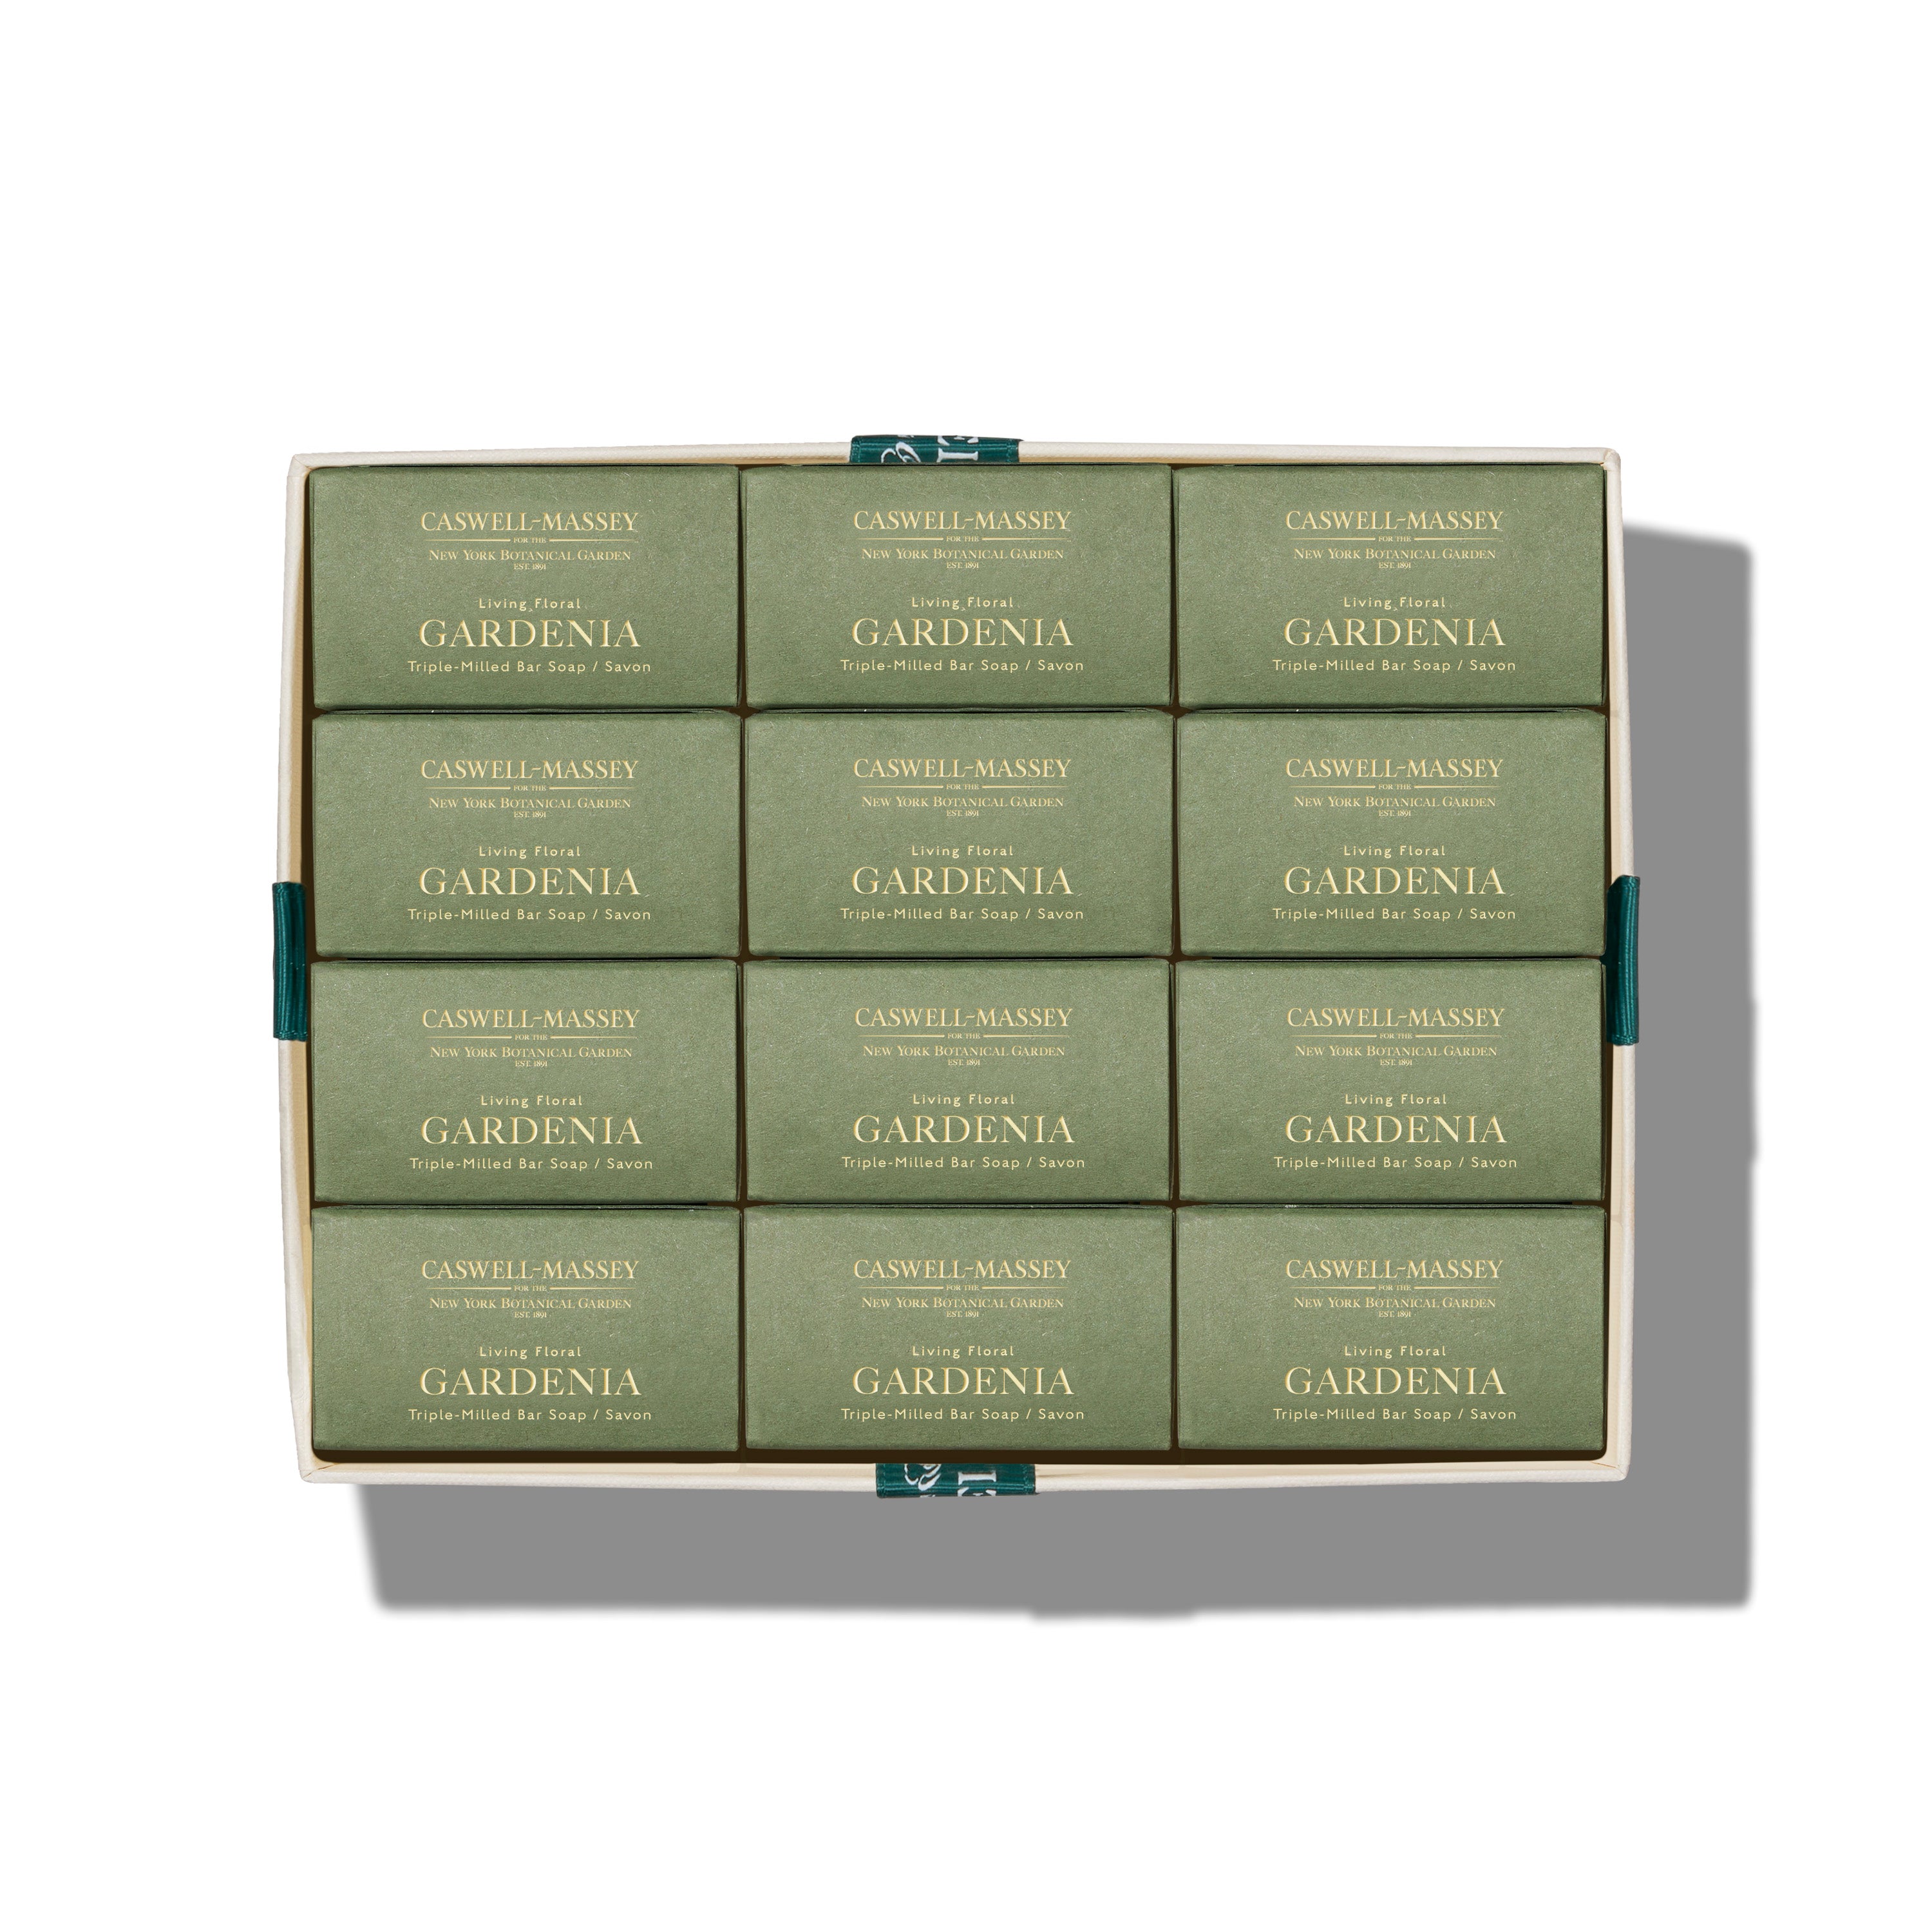 Caswell-Massey Gardenia Year of Soap 12-bar soap set, shown in gift box with ribbon